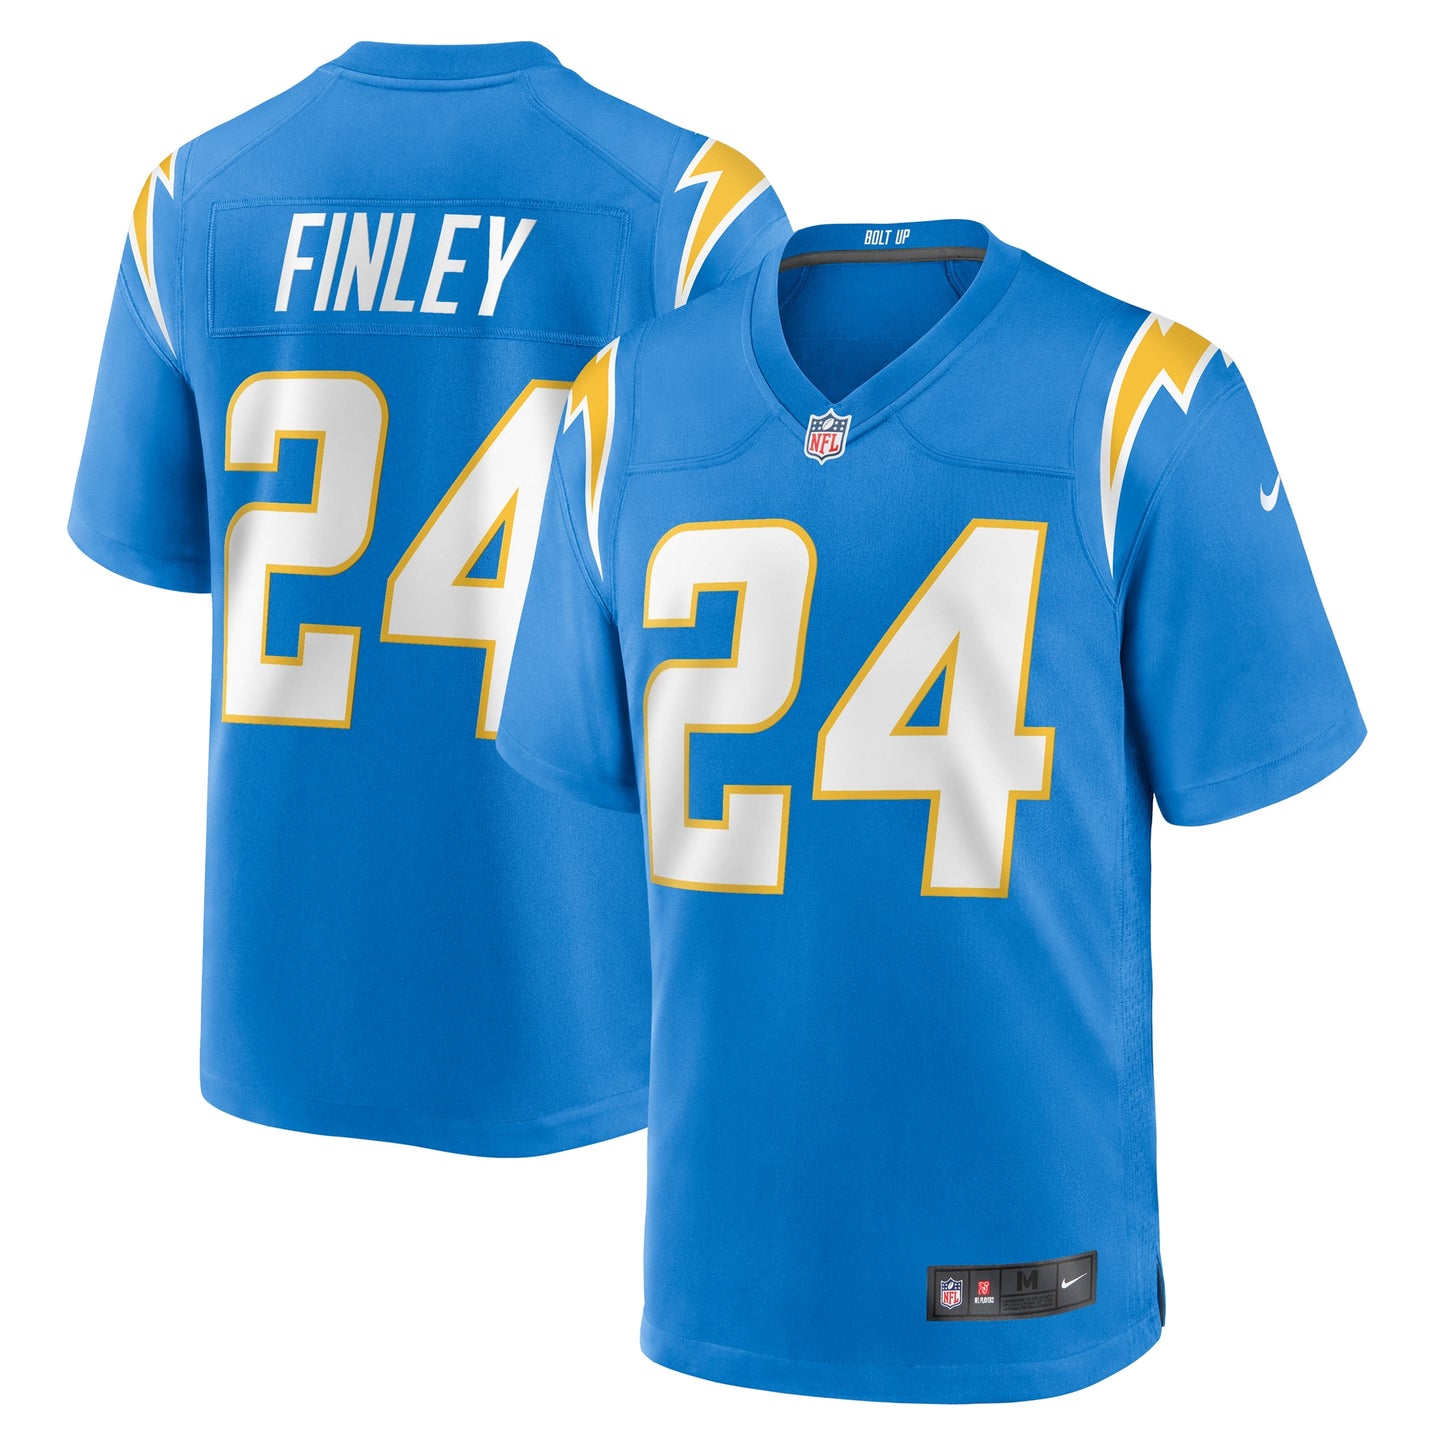 AJ Finley Los Angeles Chargers Nike Team Game Jersey - Powder Blue